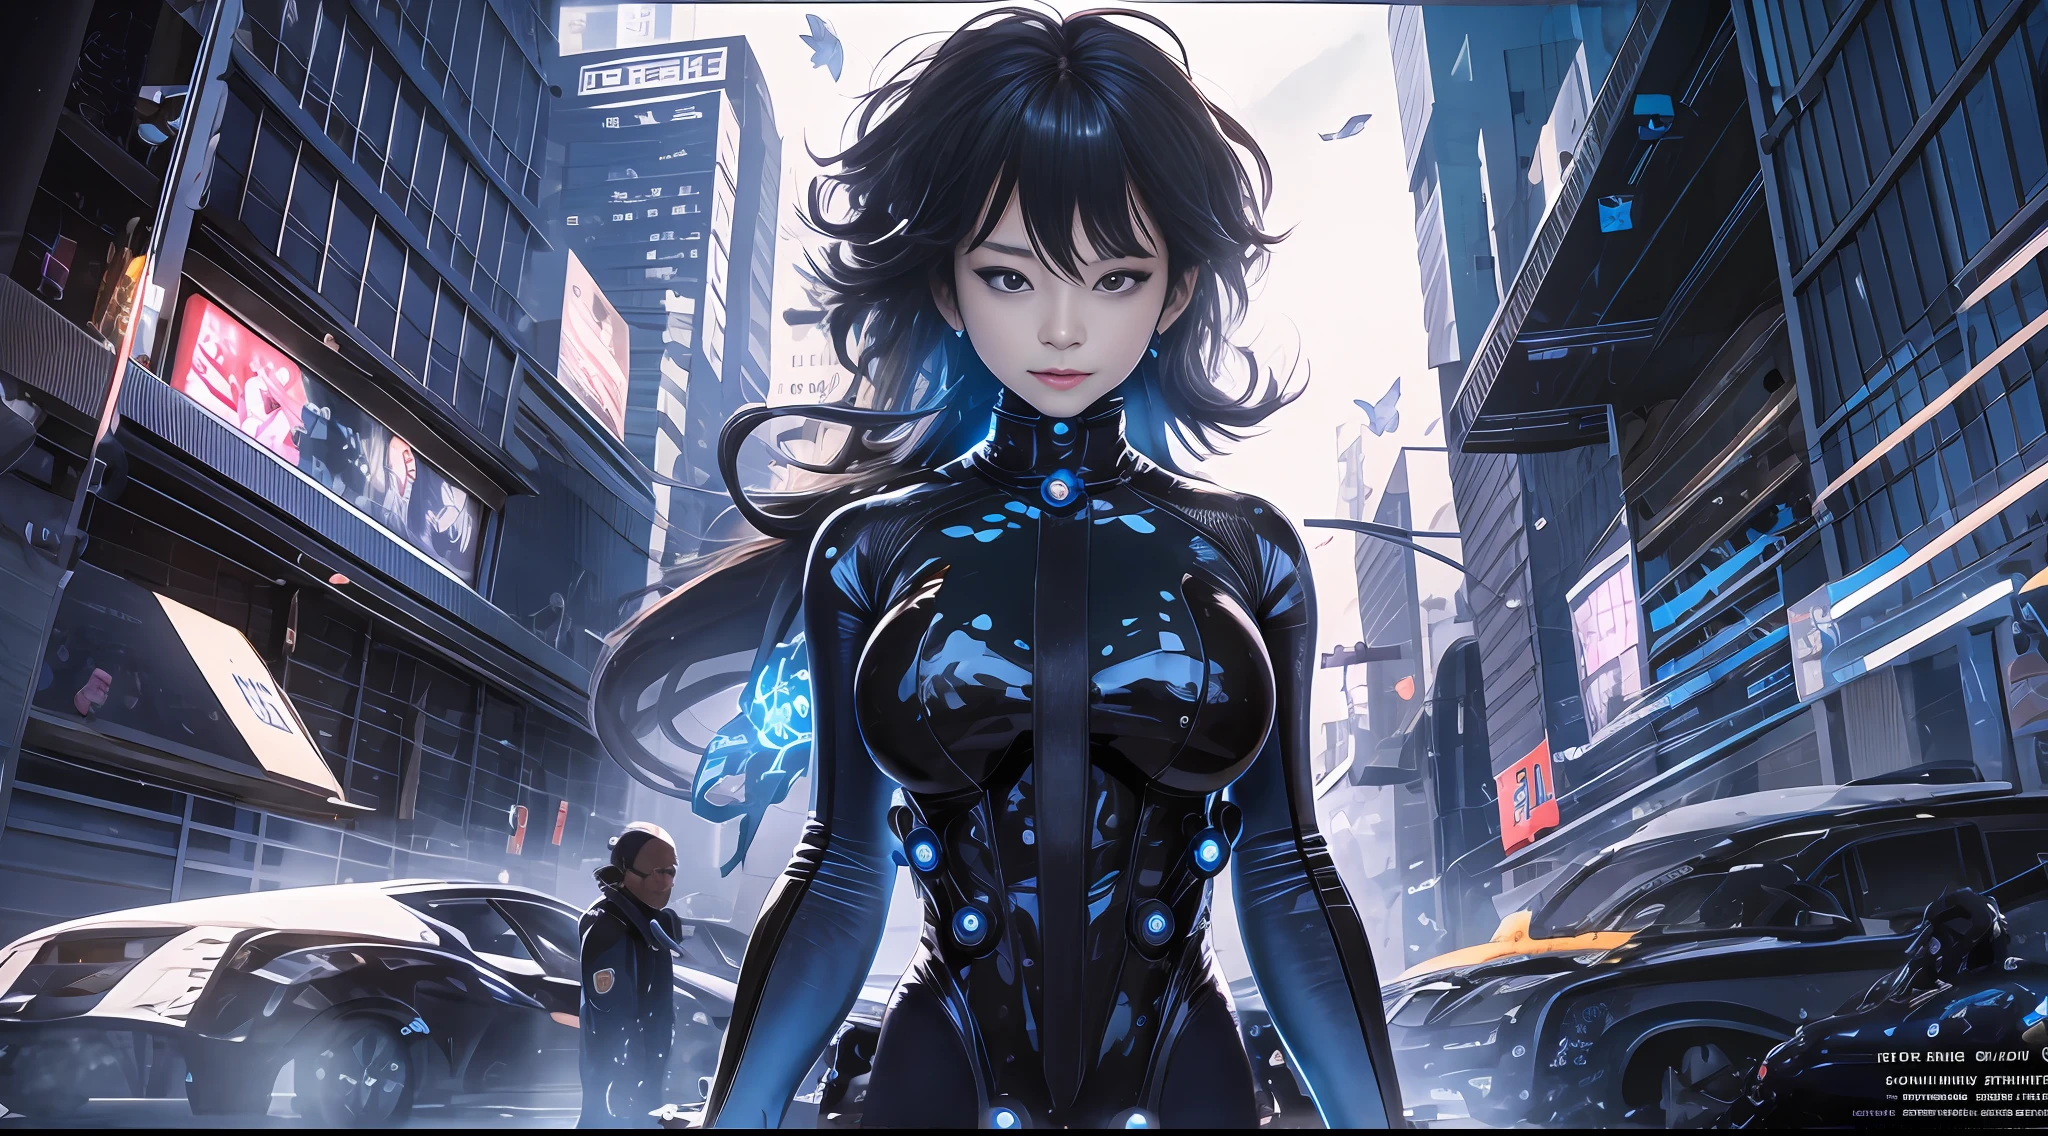 （Ultra-clear image quality）(Man in Black mech), photography of：Shinsuke Sato, (The limiter flashes blue), ((The City of the Killing:0, Black latex clothing, gantz:0)), Night City Battle background, The fire burst into the sky, Sparks fly, cyberpunk glossy latex suit, gantz, cyberpunk anime, futuristic glossy latex suit, styled like ghost in the shell, diverse cybersuits, movie poster character, an oppai cyberpunk, cyber suit, cyber suit, (tmasterpiece), Ultra-Wide Angle, UHD, retina, anatomically correct, textured skin, ccurate, highres, 16k, award winning